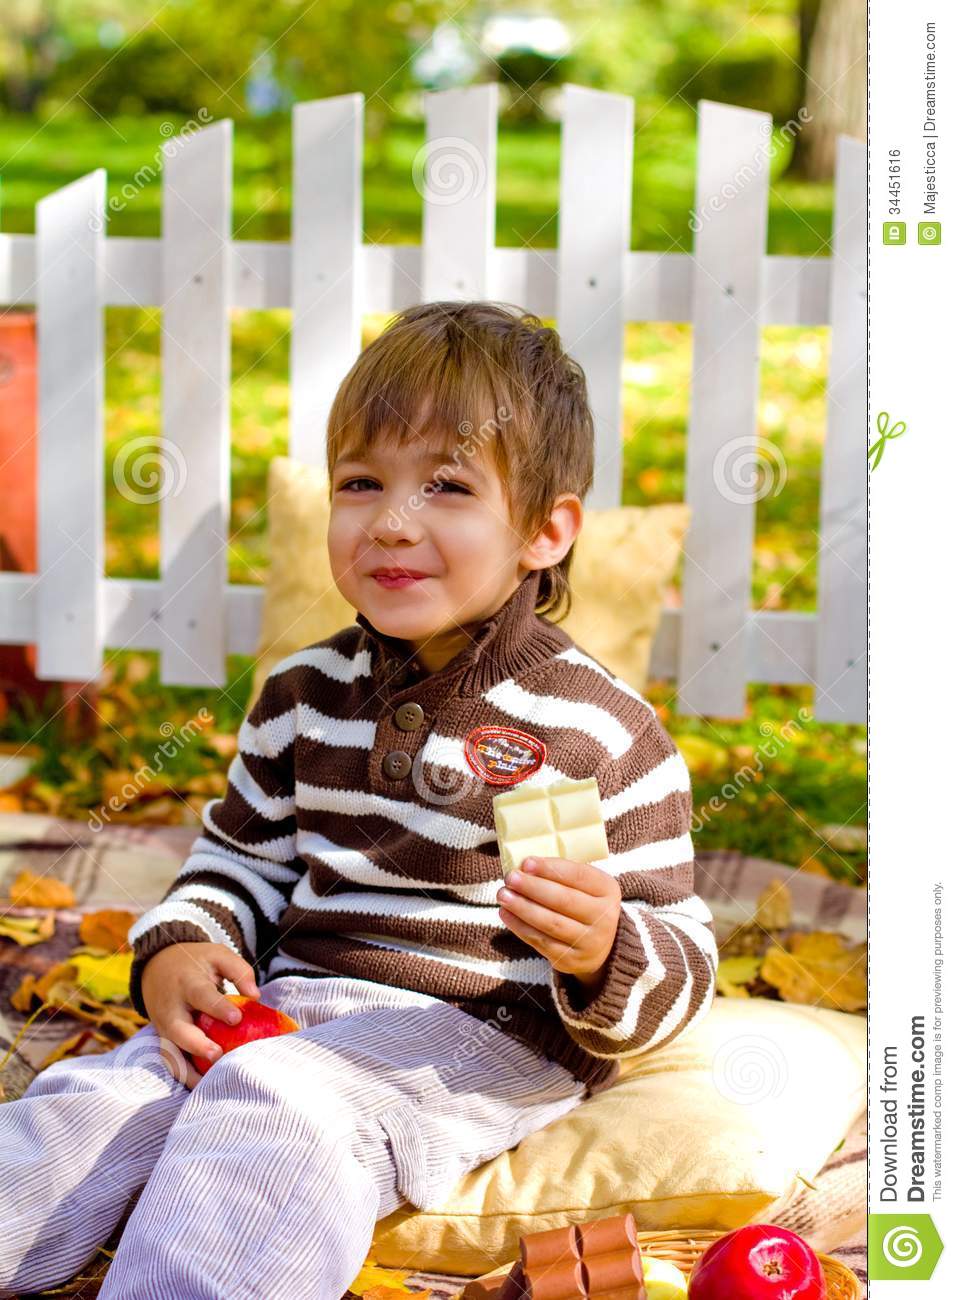 Happy Little Boy Eating Chocolate In The Autumn Forest Royalty Free